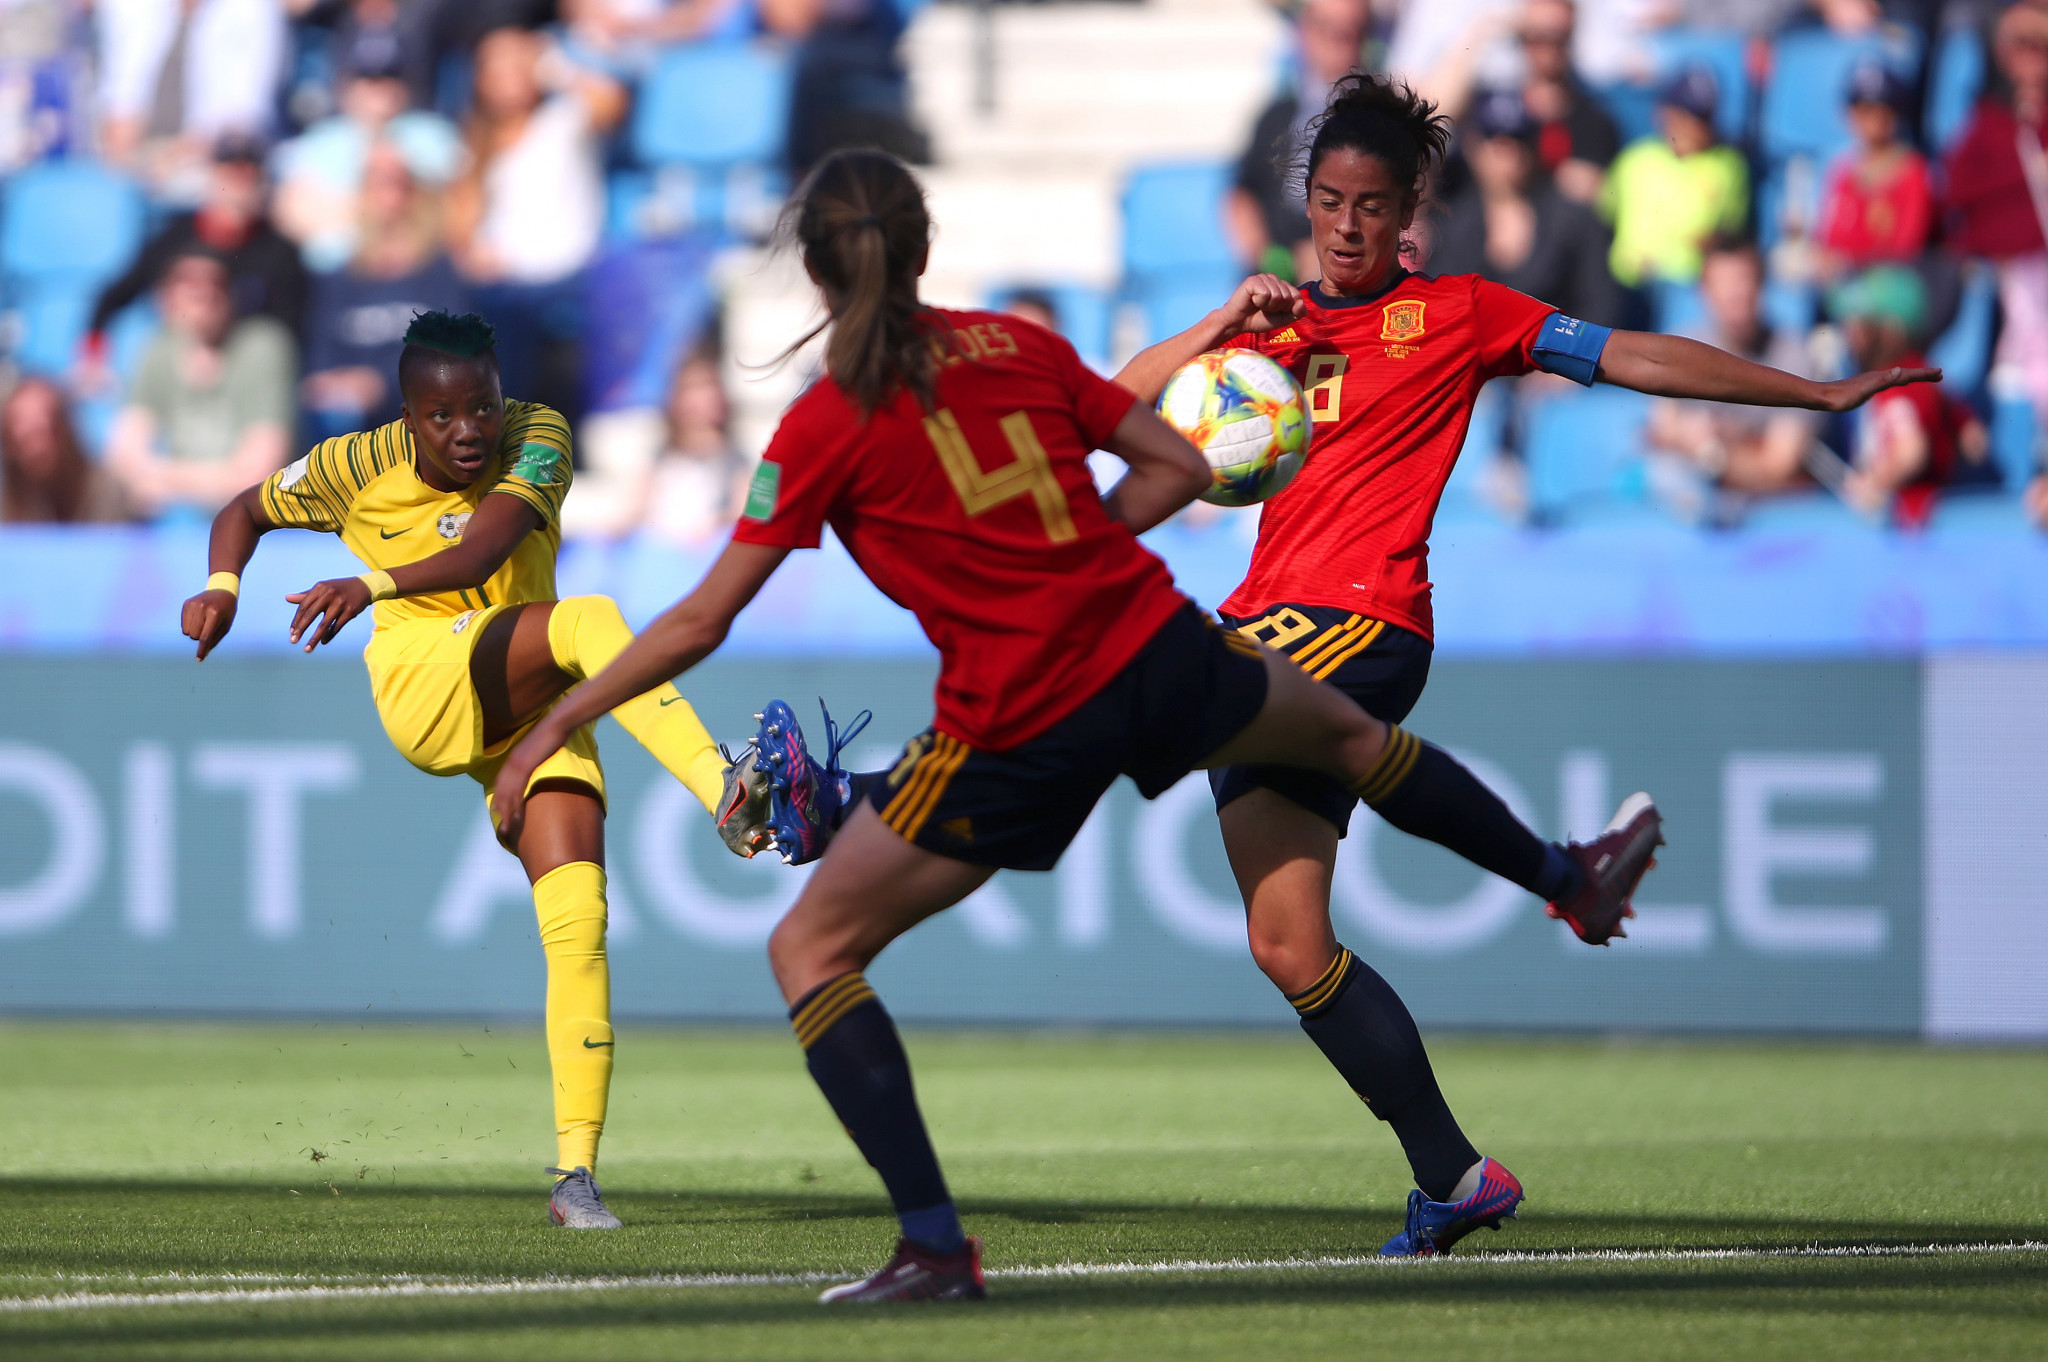 In the Group B clash between South Africa and Spain, Thembi Kgatlana scored an impressive opener for South Africa ©Getty Images